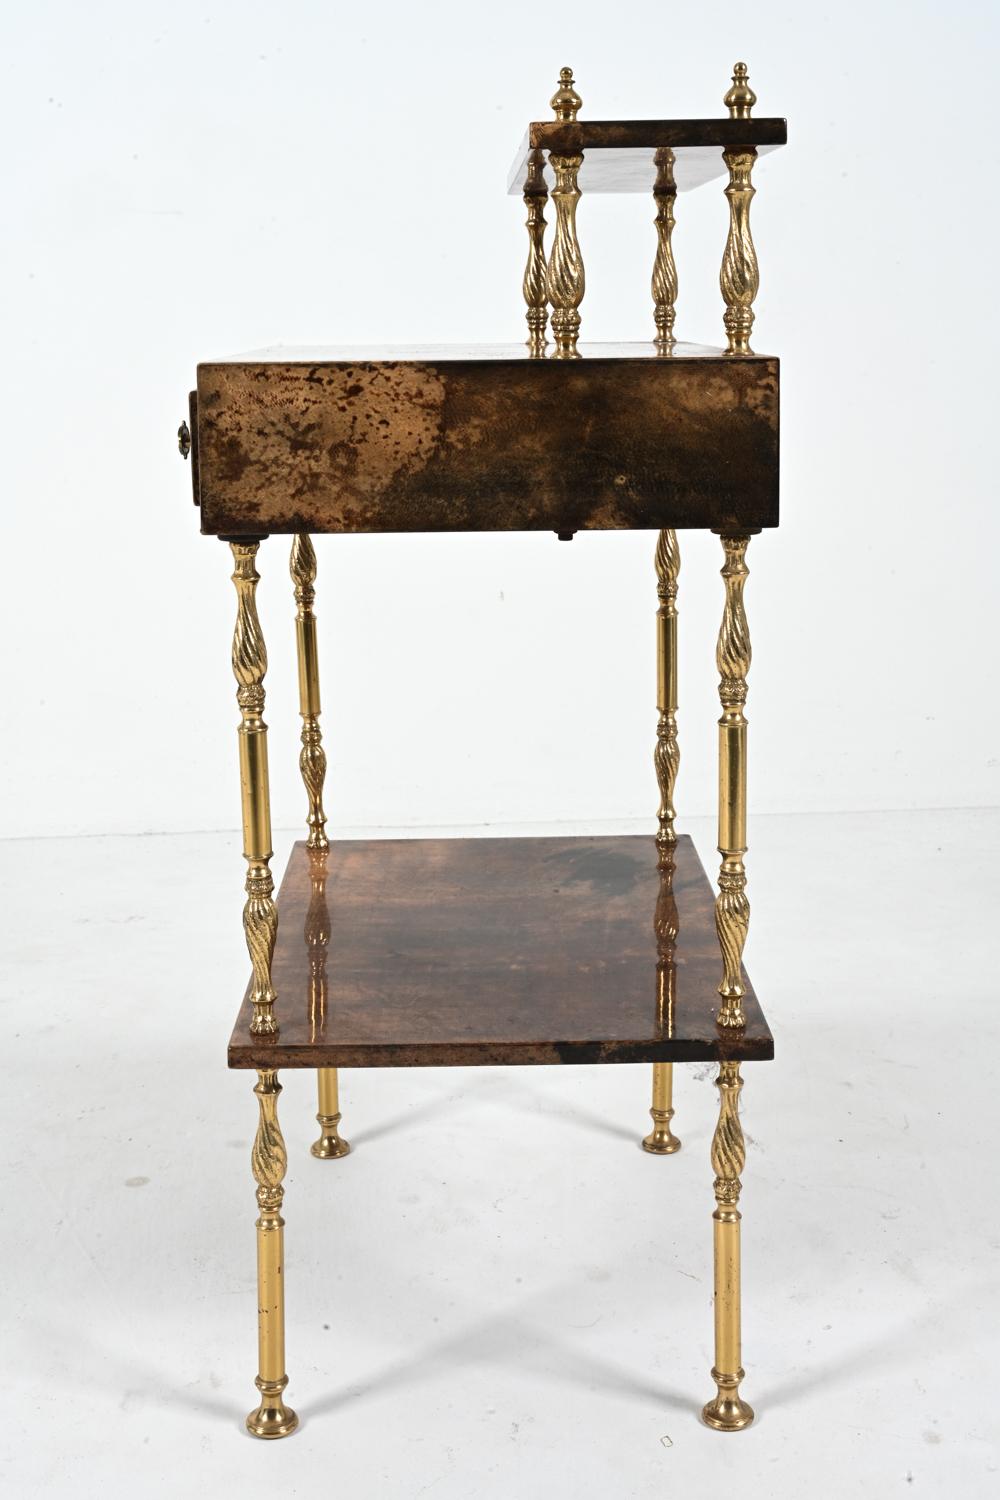 Aldo Tura Lacquered Goatskin & Brass Occasional Table, c. 1960's For Sale 7